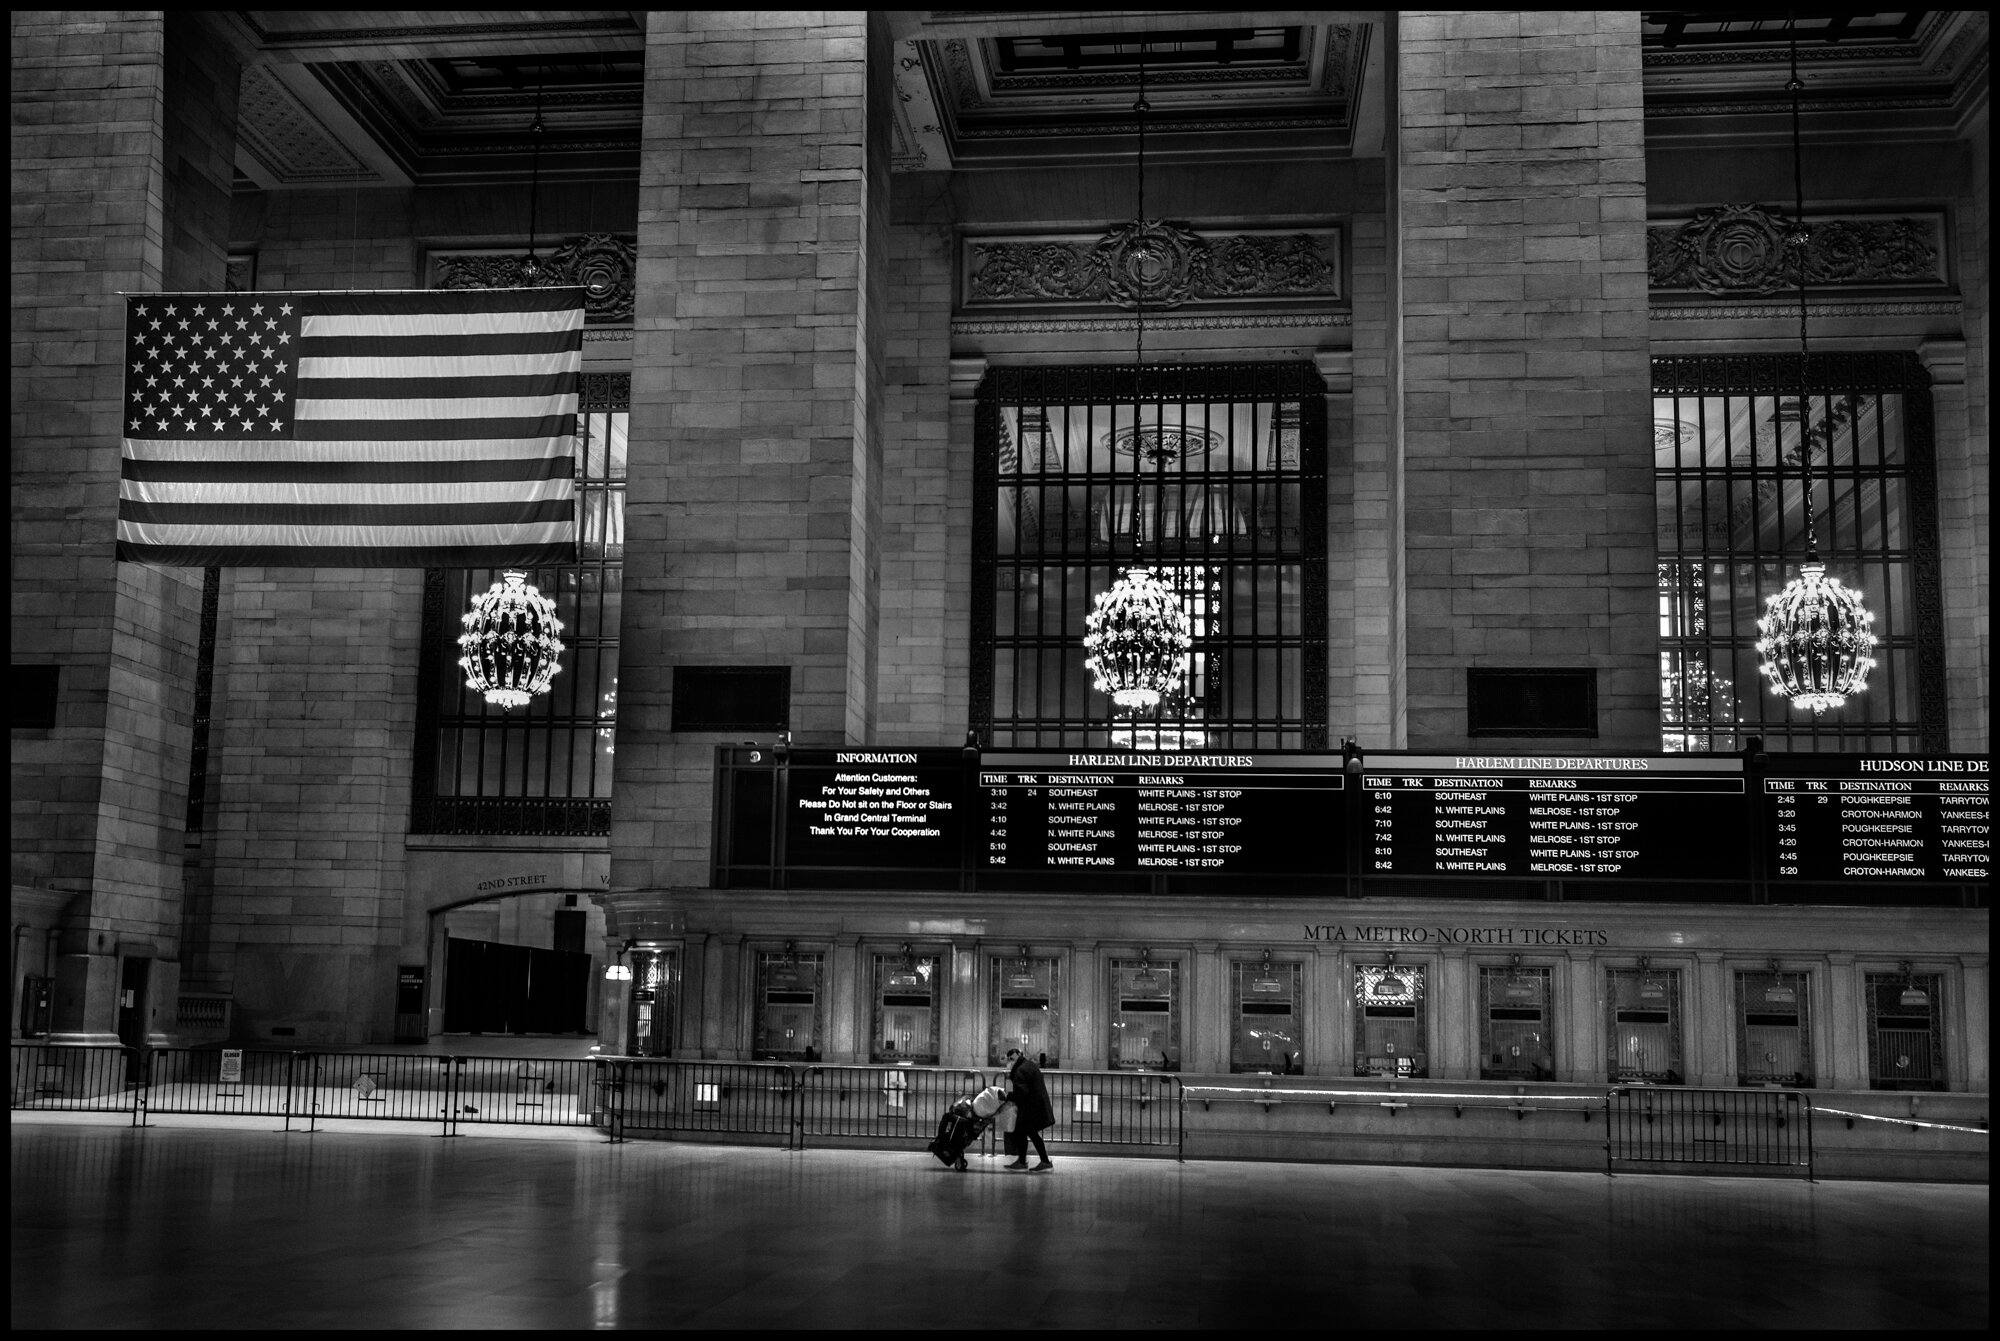  Grand Cental Station, New York.  April 18, 2020. © Peter Turnley.   ID# 25-001 